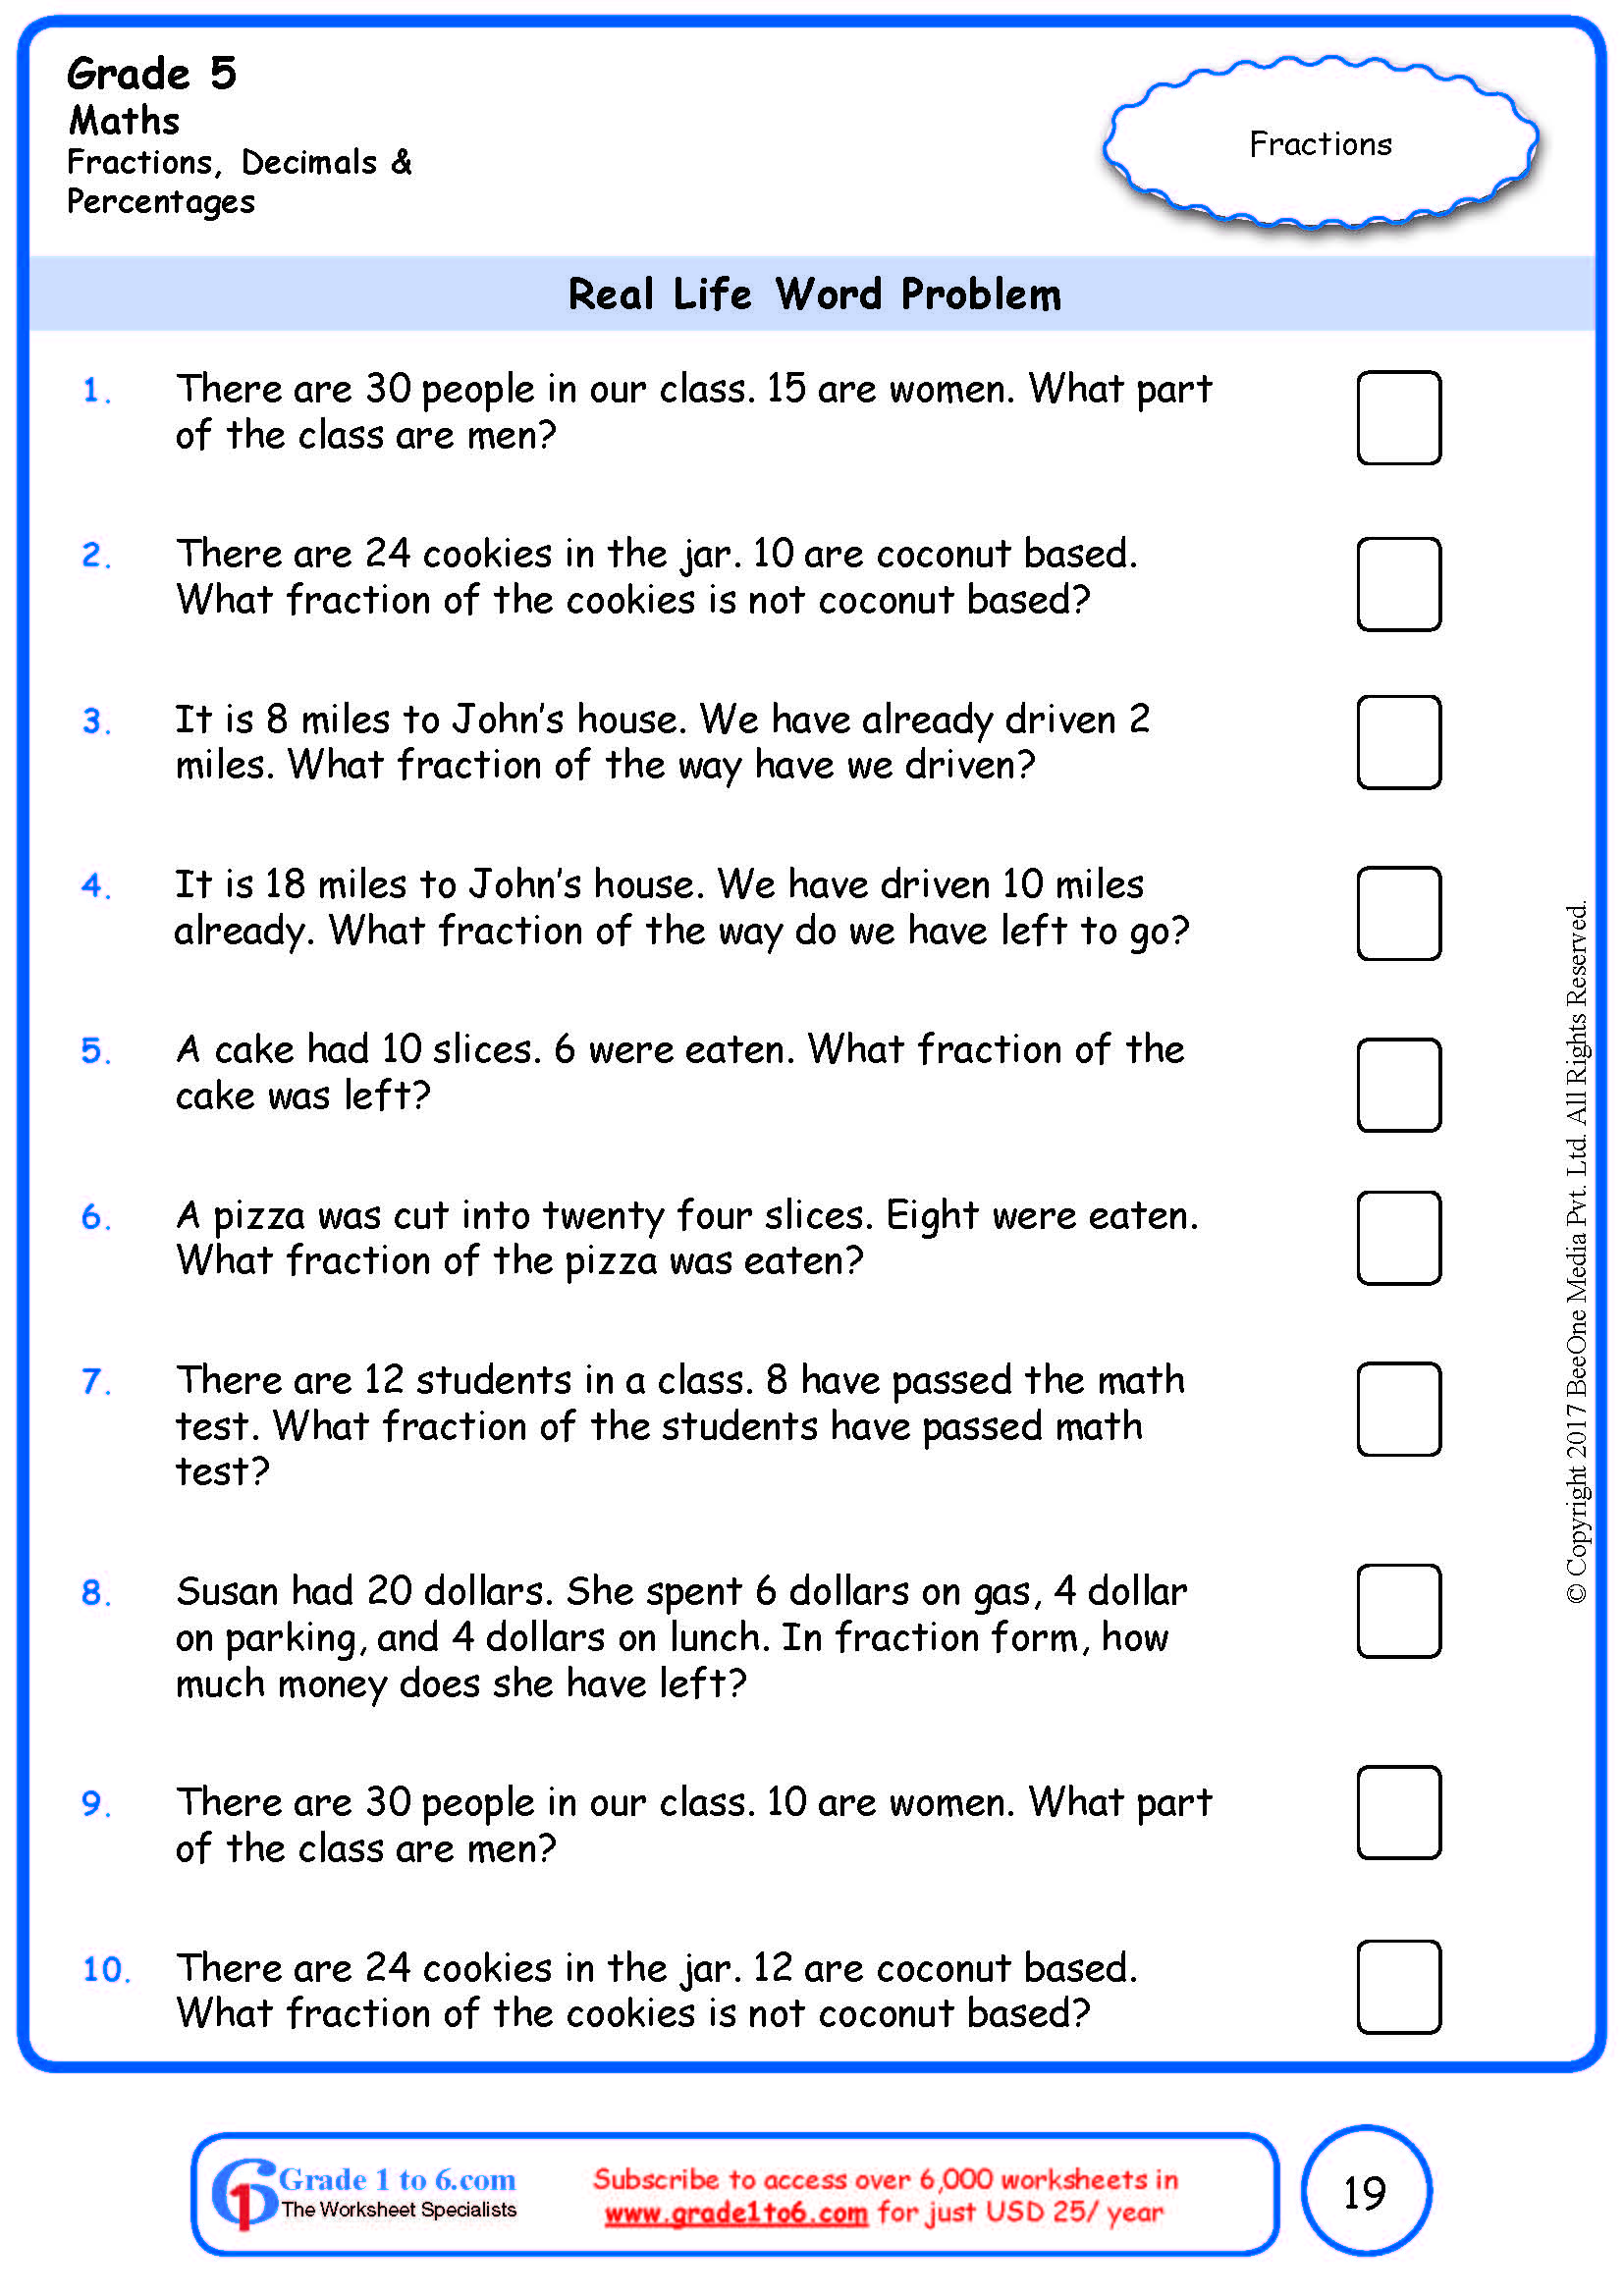 Grade 5 Word Problems In Fractions Worksheets www grade1to6